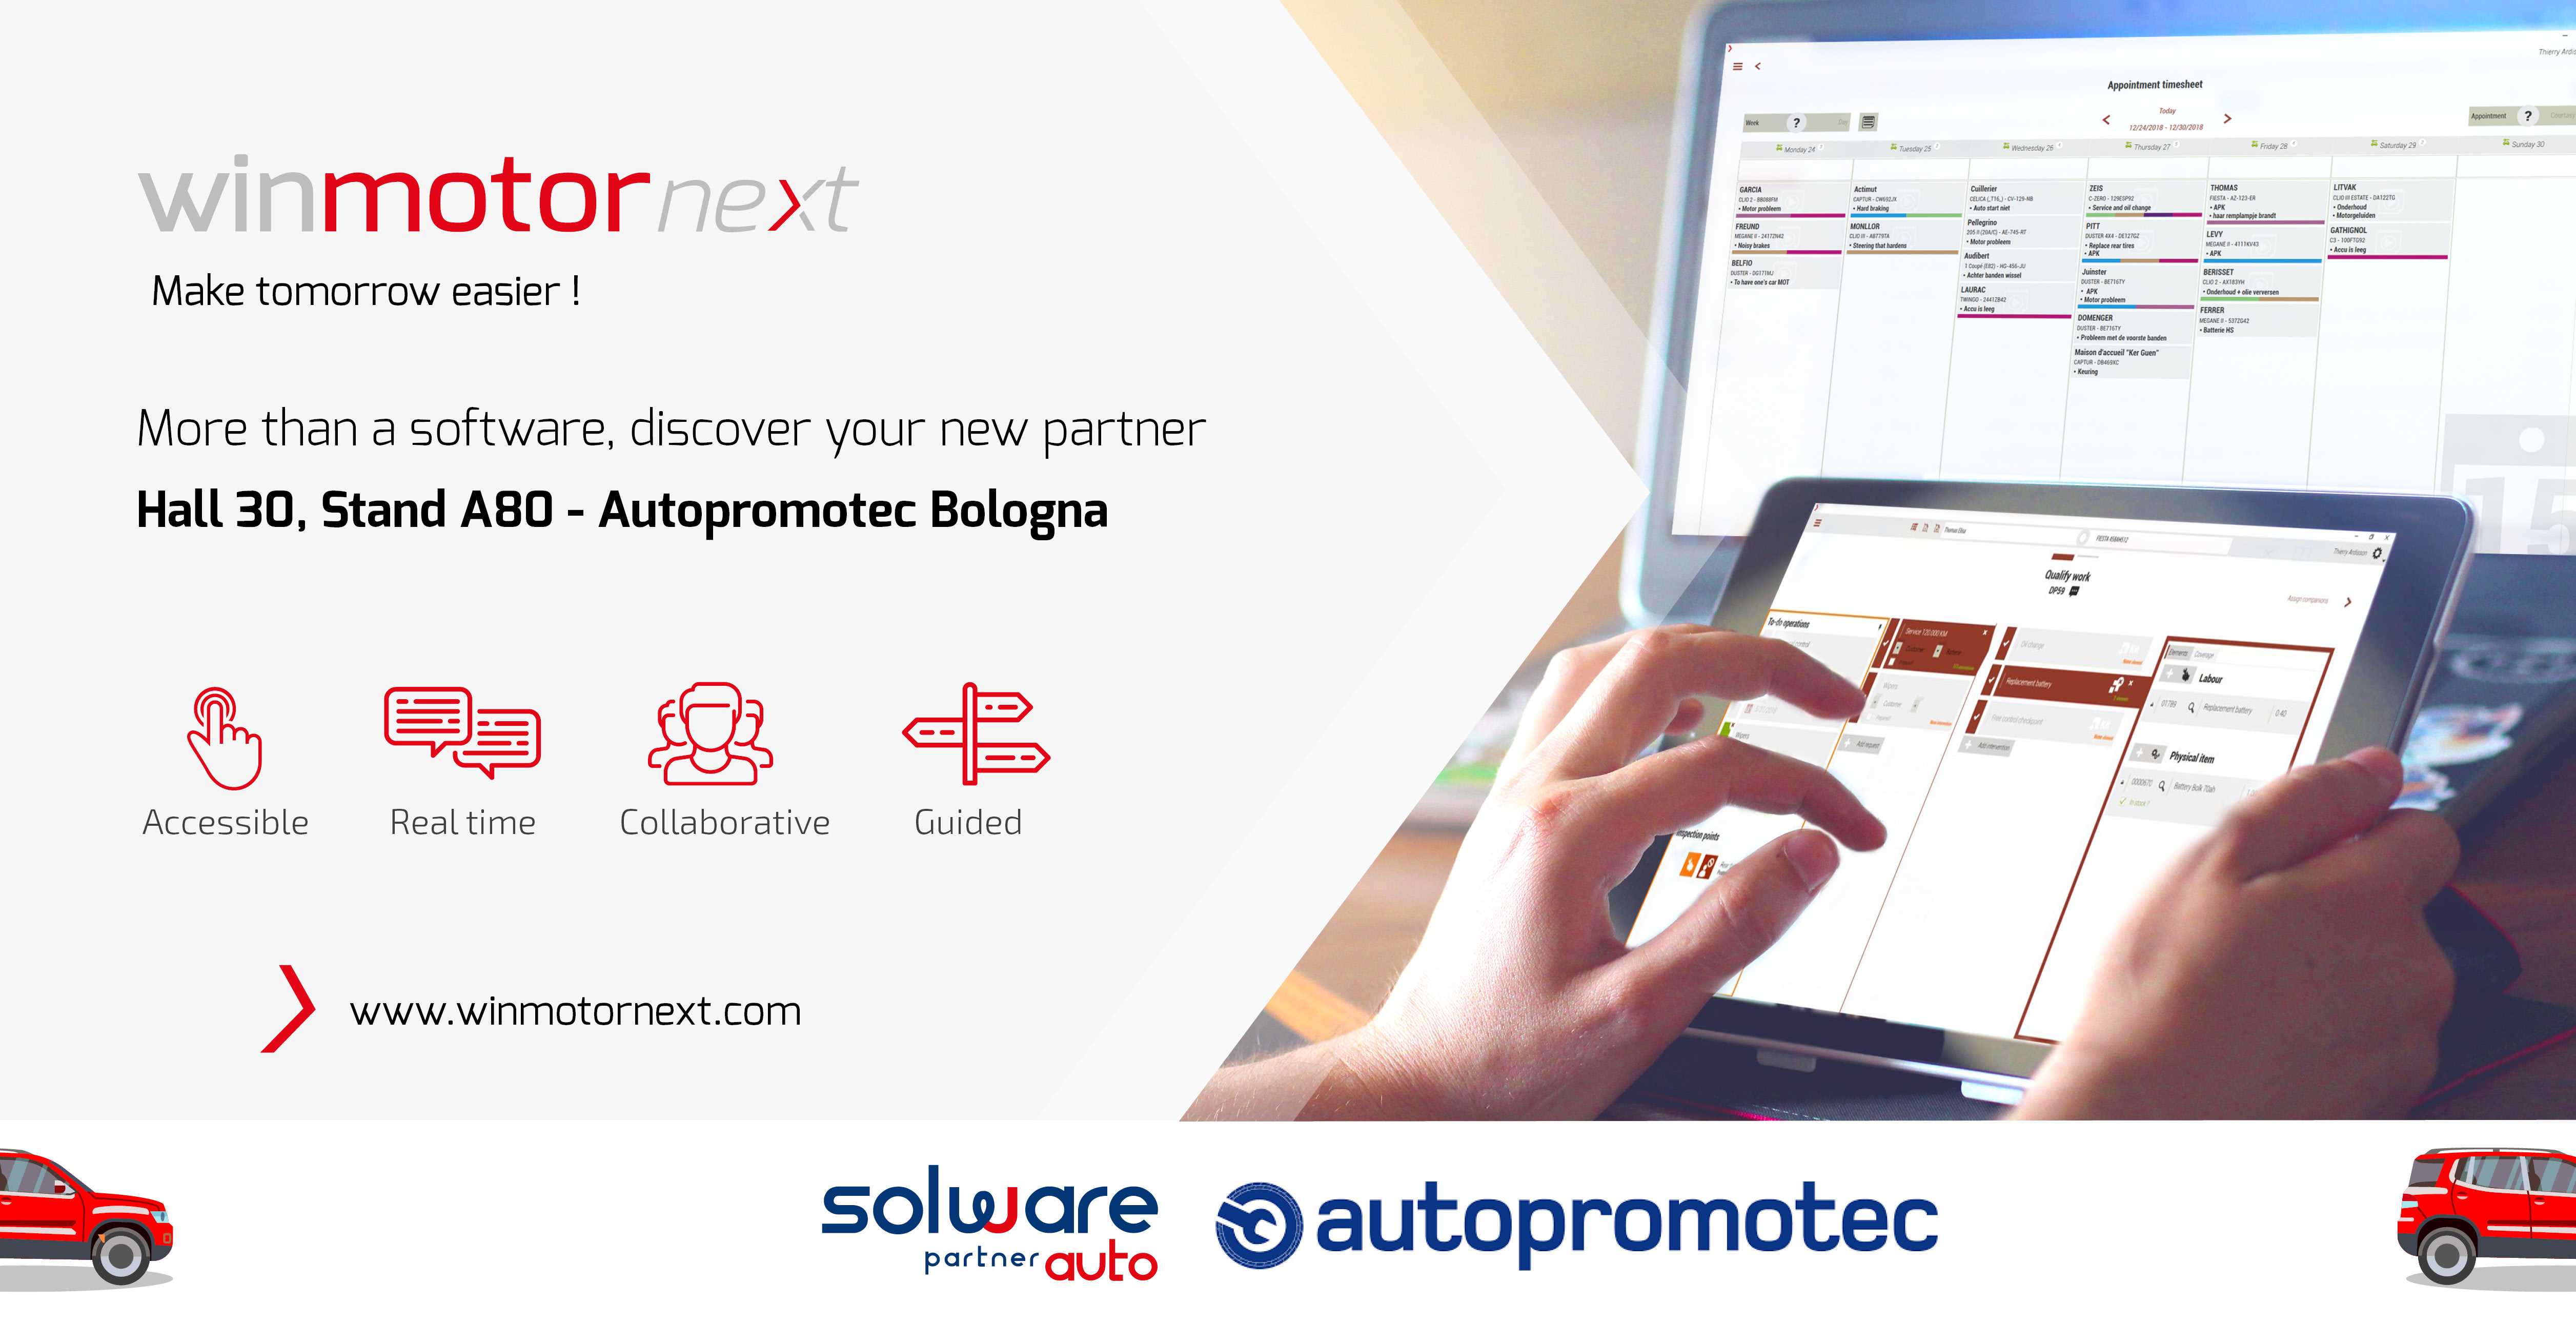 Solware Auto and winmotor next software at Autopromotec in Bologna